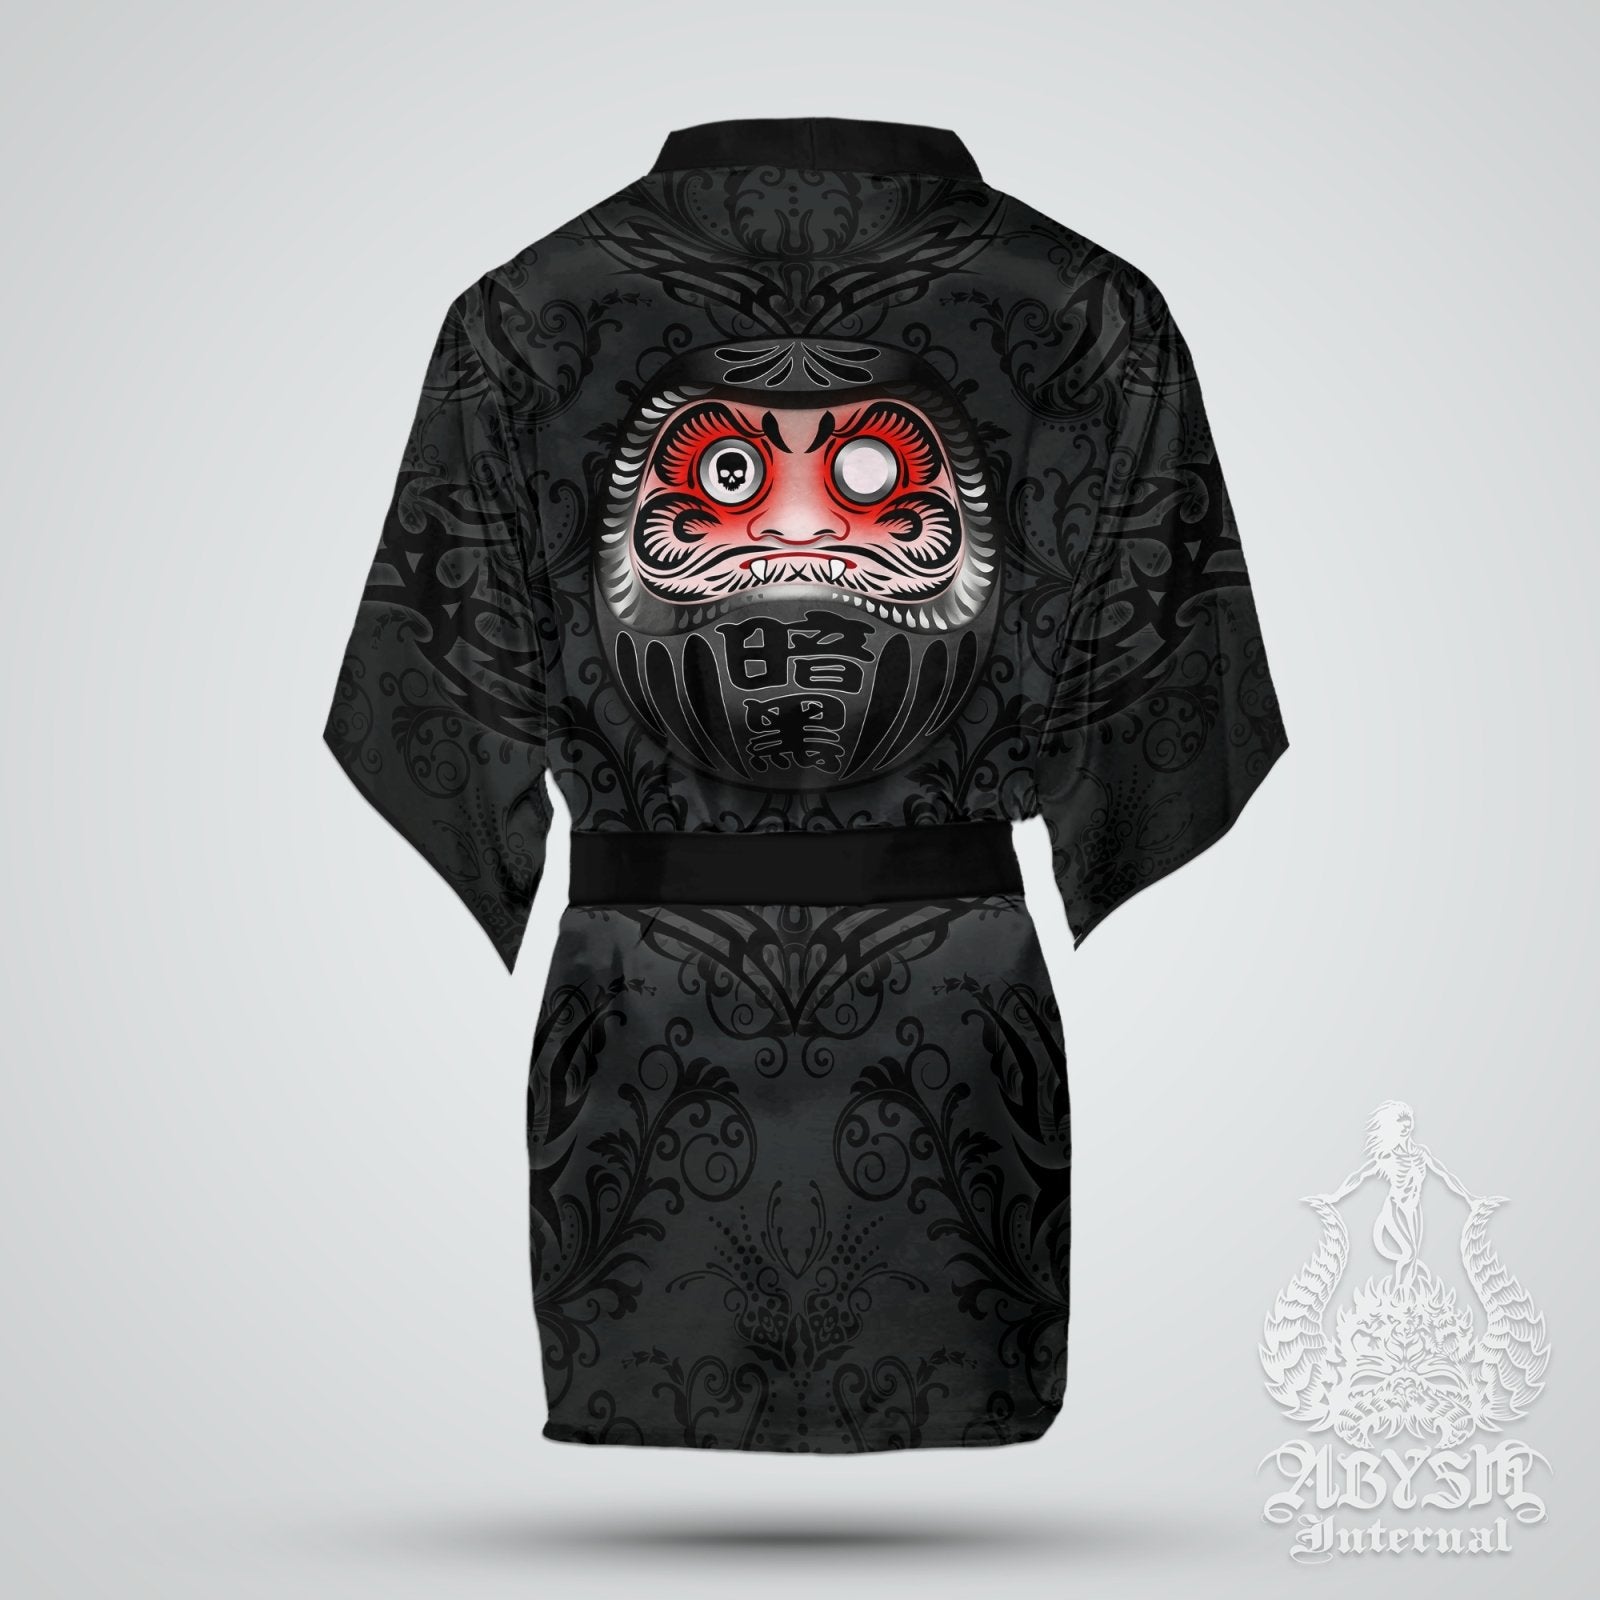 Daruma Cover Up, Beach Outfit, Party Kimono, Japanese Summer Festival Robe, Indie and Alternative Clothing, Unisex - Black - Abysm Internal